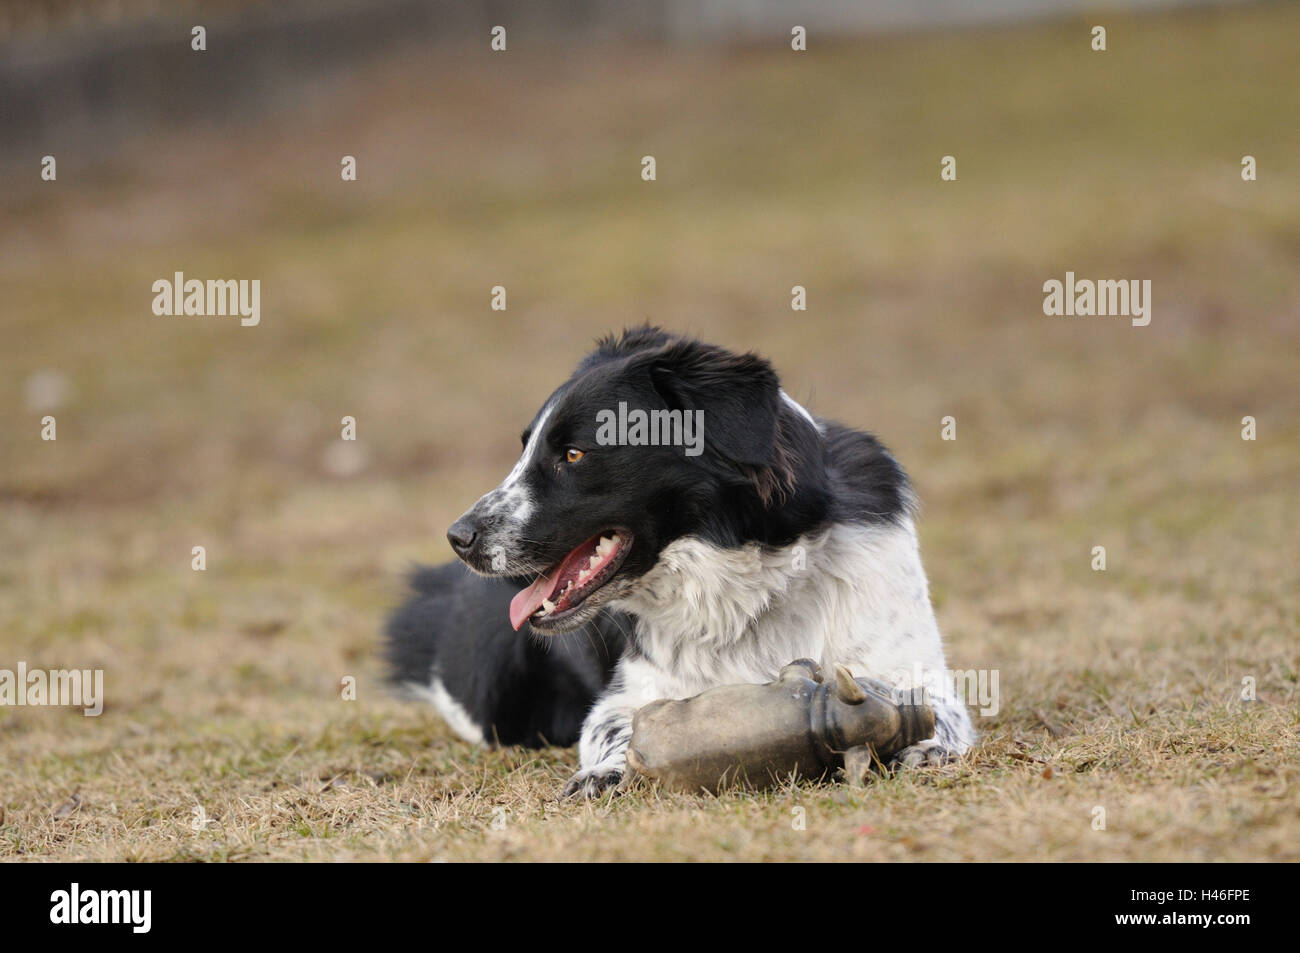 Of Border collie, meadow, head-on, lie, view side view, Stock Photo